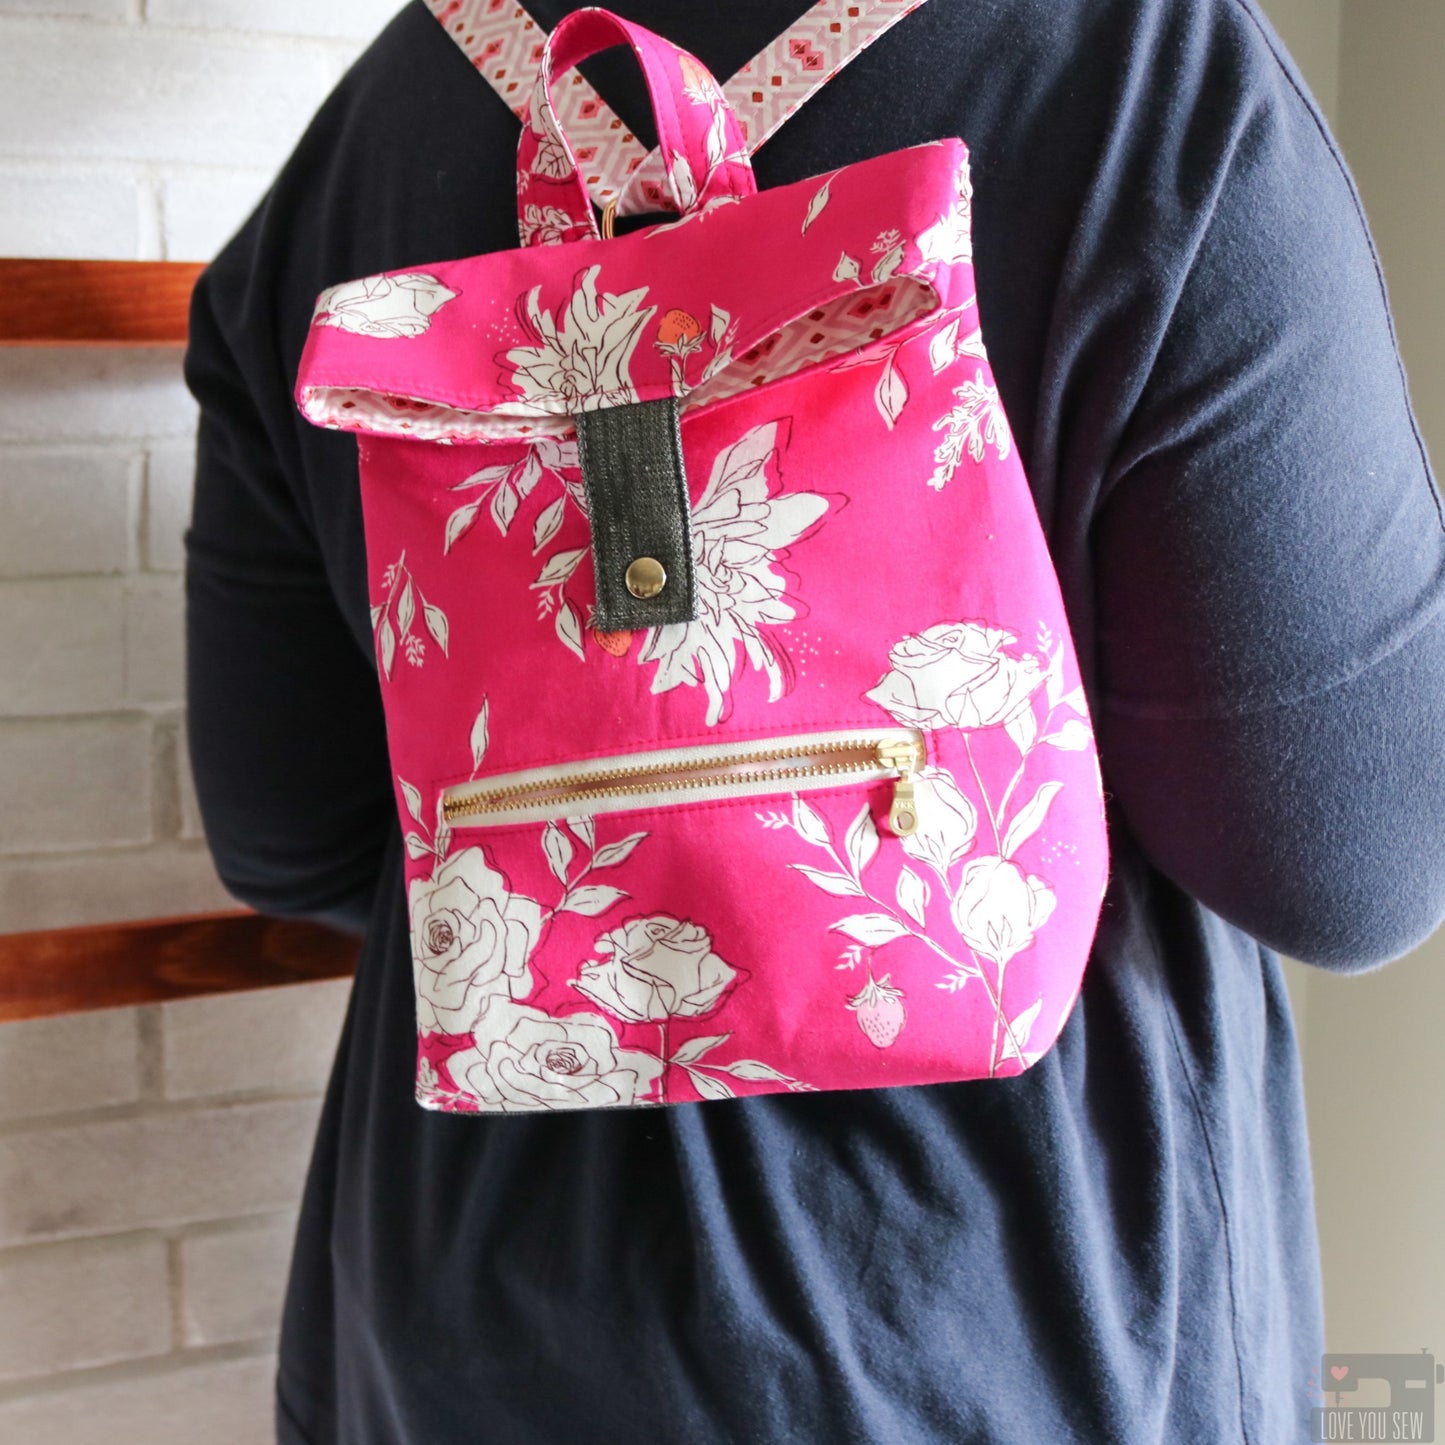 Backpack Sewing Pattern